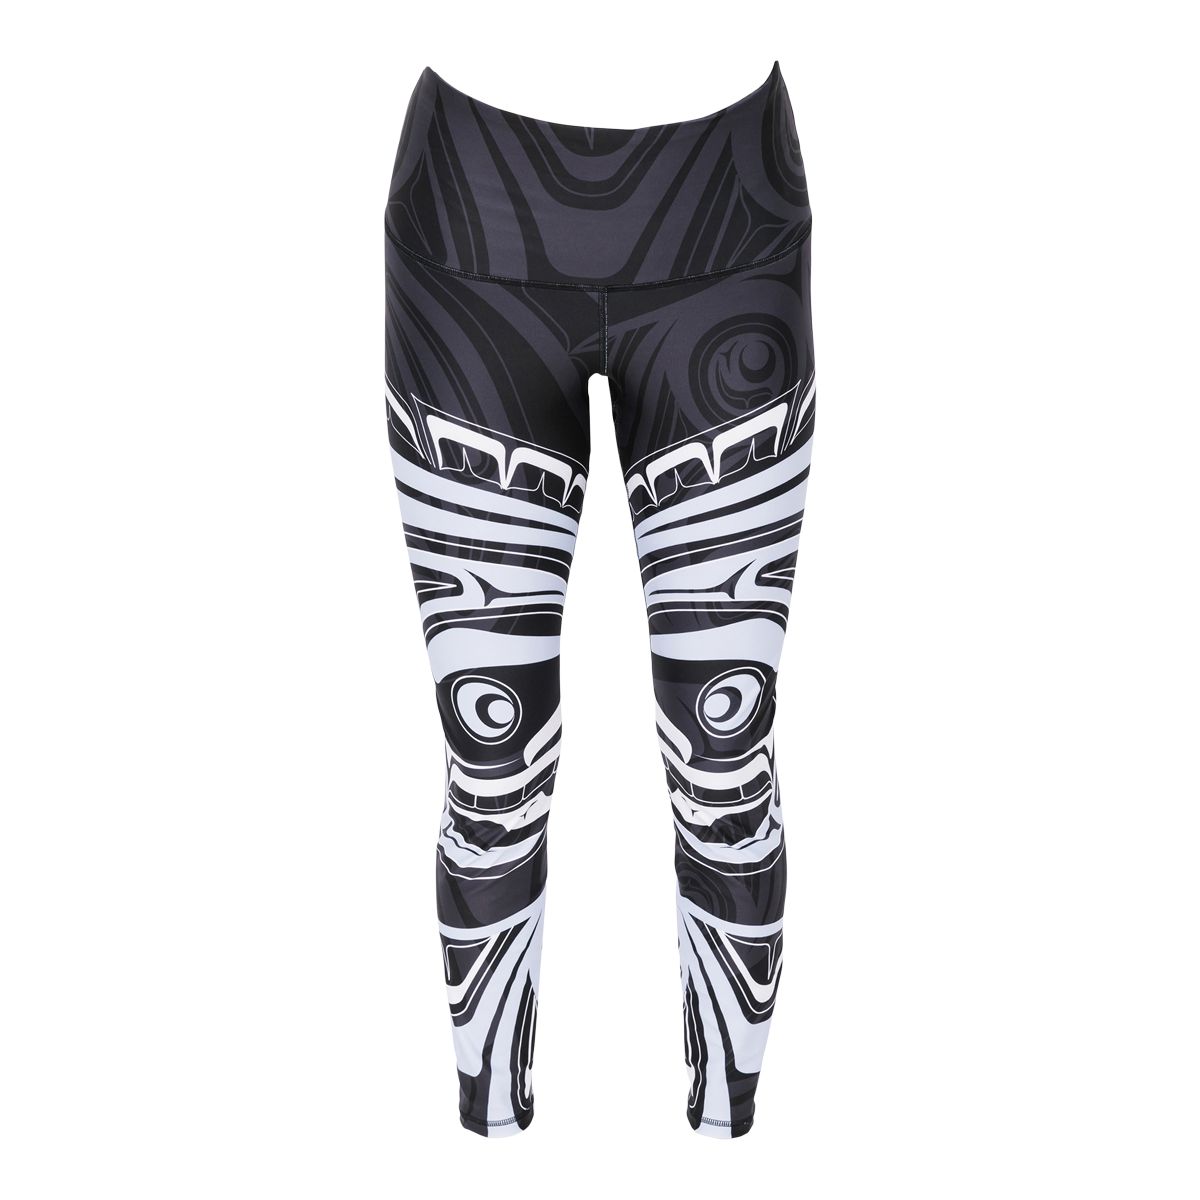 https://media-www.sportchek.ca/product/div-03-softgoods/dpt-70-athletic-clothing/sdpt-02-womens/334031975/nominou-w-hr-28in-wolf-moon-tight-q322-3bda8616-1680-4936-b67a-582314fcc410-jpgrendition.jpg?imdensity=1&imwidth=1244&impolicy=mZoom